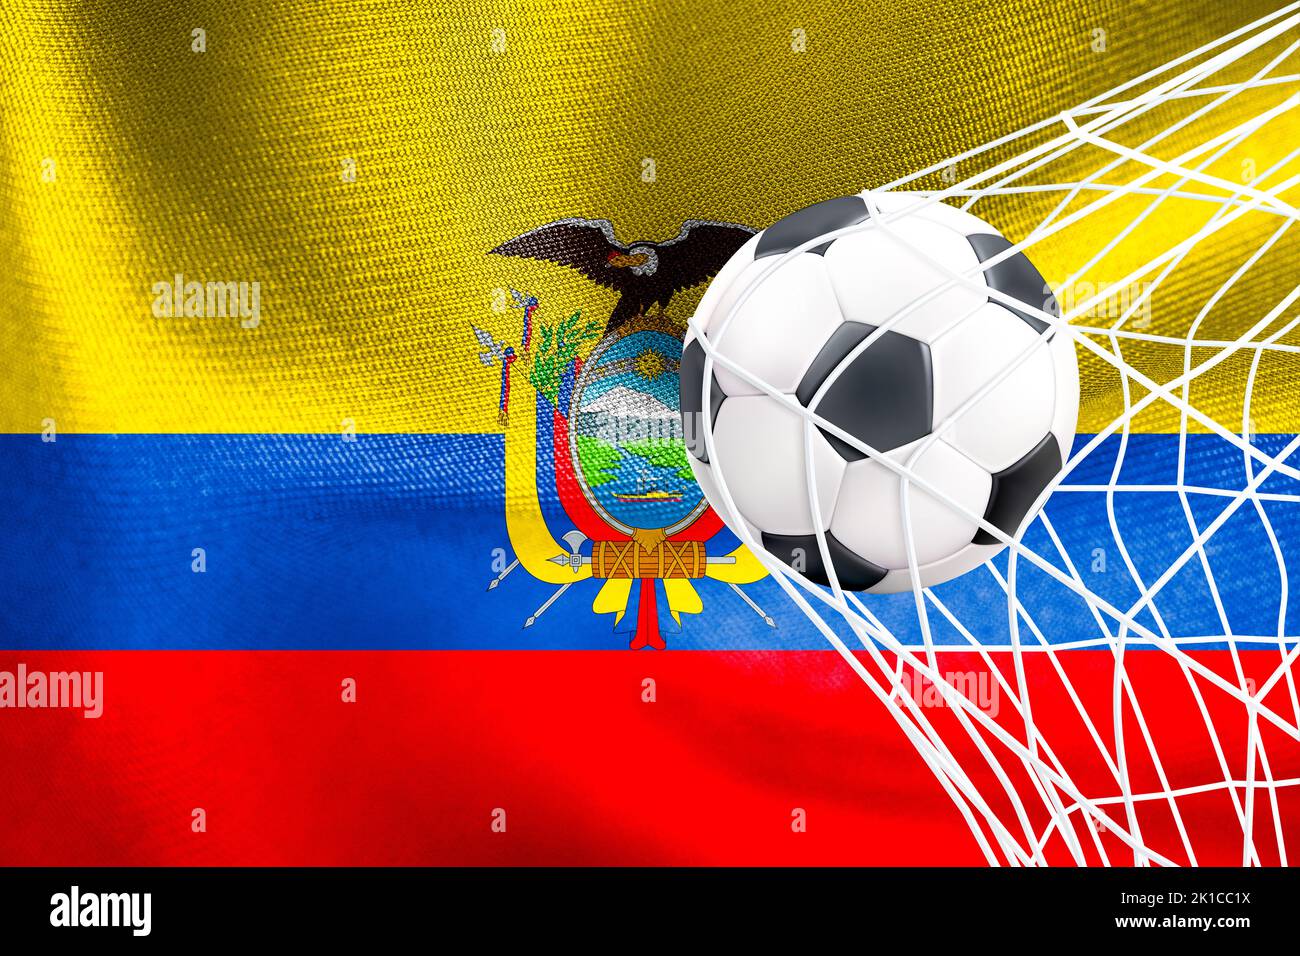 FIFA World Cup 2022, Ecuador National flag with a soccer ball in net, Qatar 2022 Wallpaper, 3D work and 3D image. Yerevan, Armenia - 2022 September 16 Stock Photo